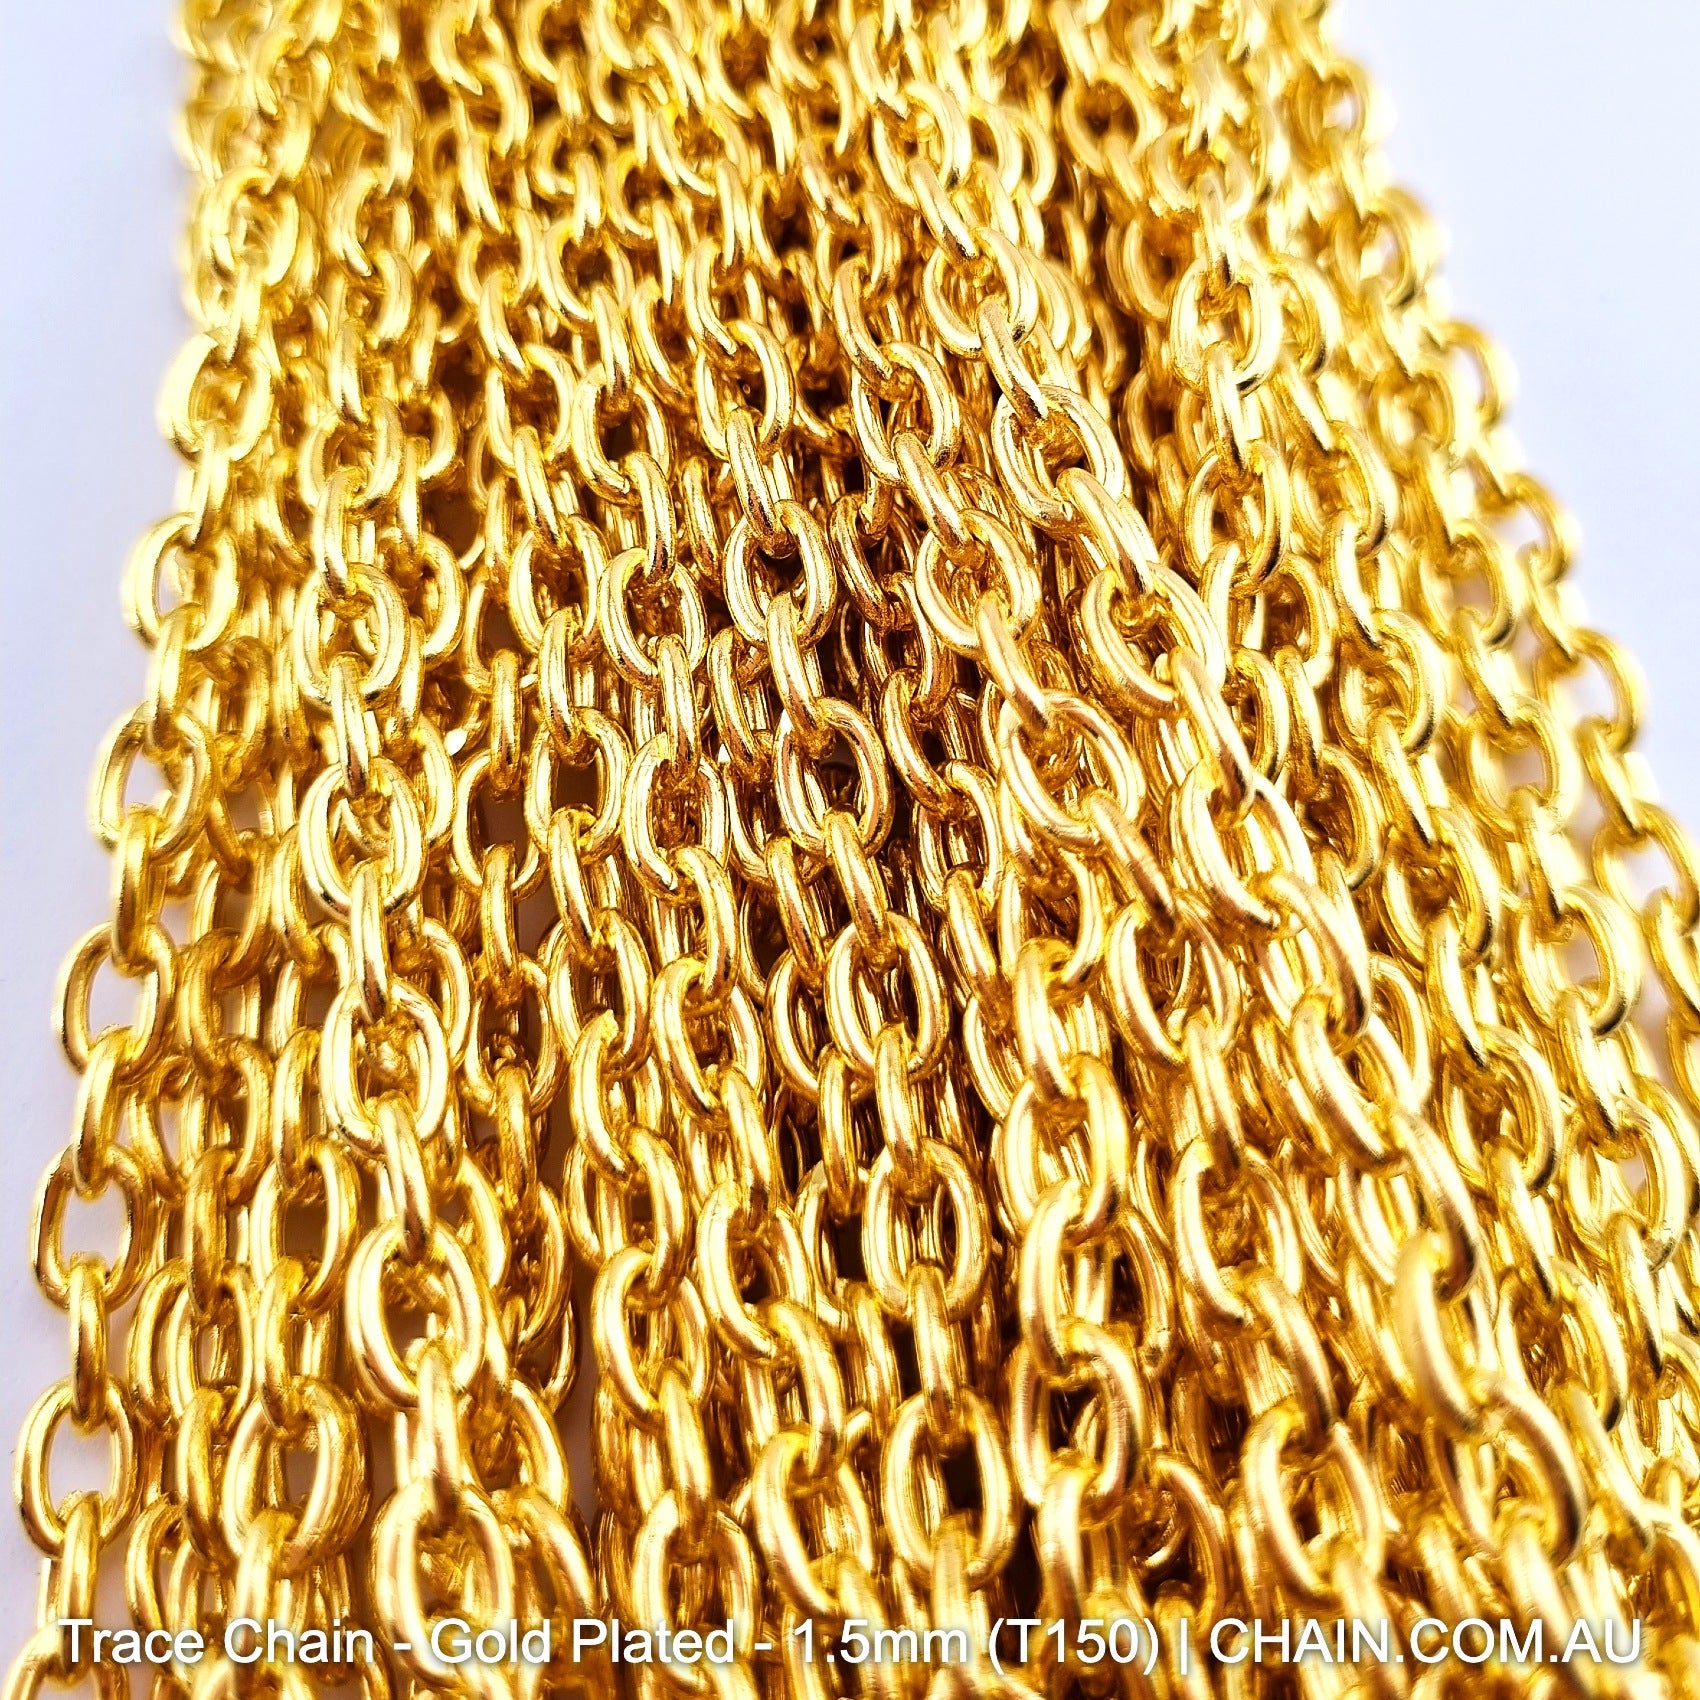 Trace Chain in a Gold Plated Finish. Size: 1.5mm, T150. Jewellery Chain, Australia wide shipping. Shop chain.com.au